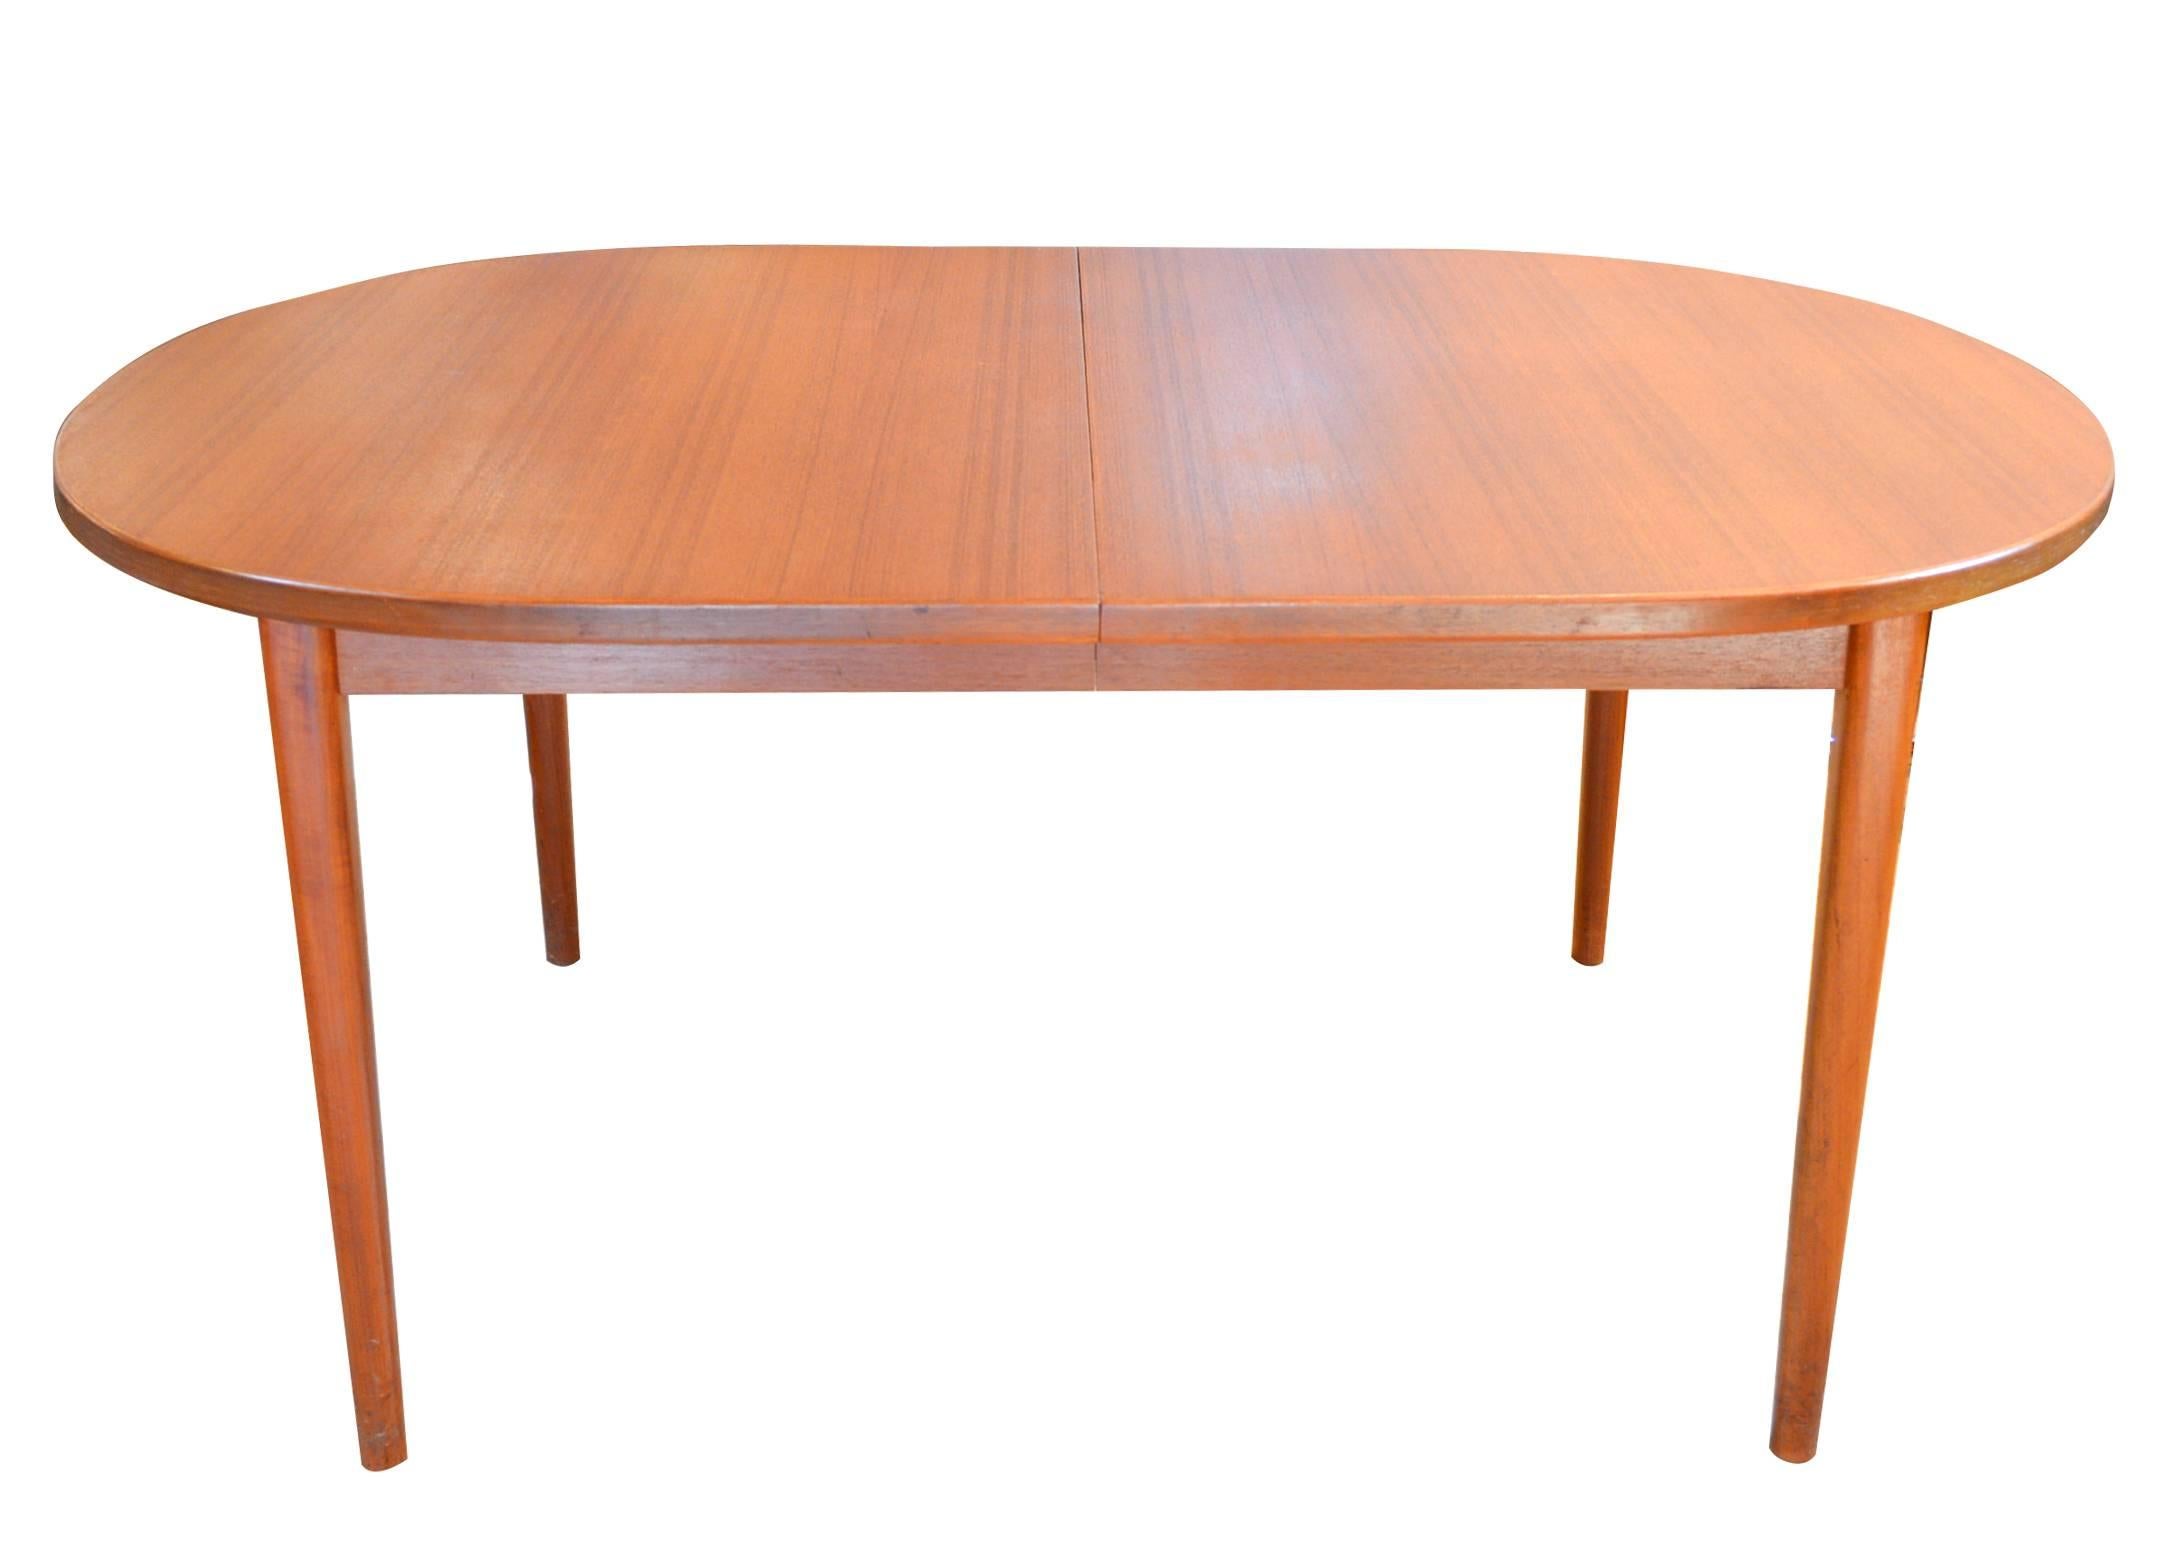 Swedish Nils Jonsson for Troeds Teak Dining Table with Two Leaves